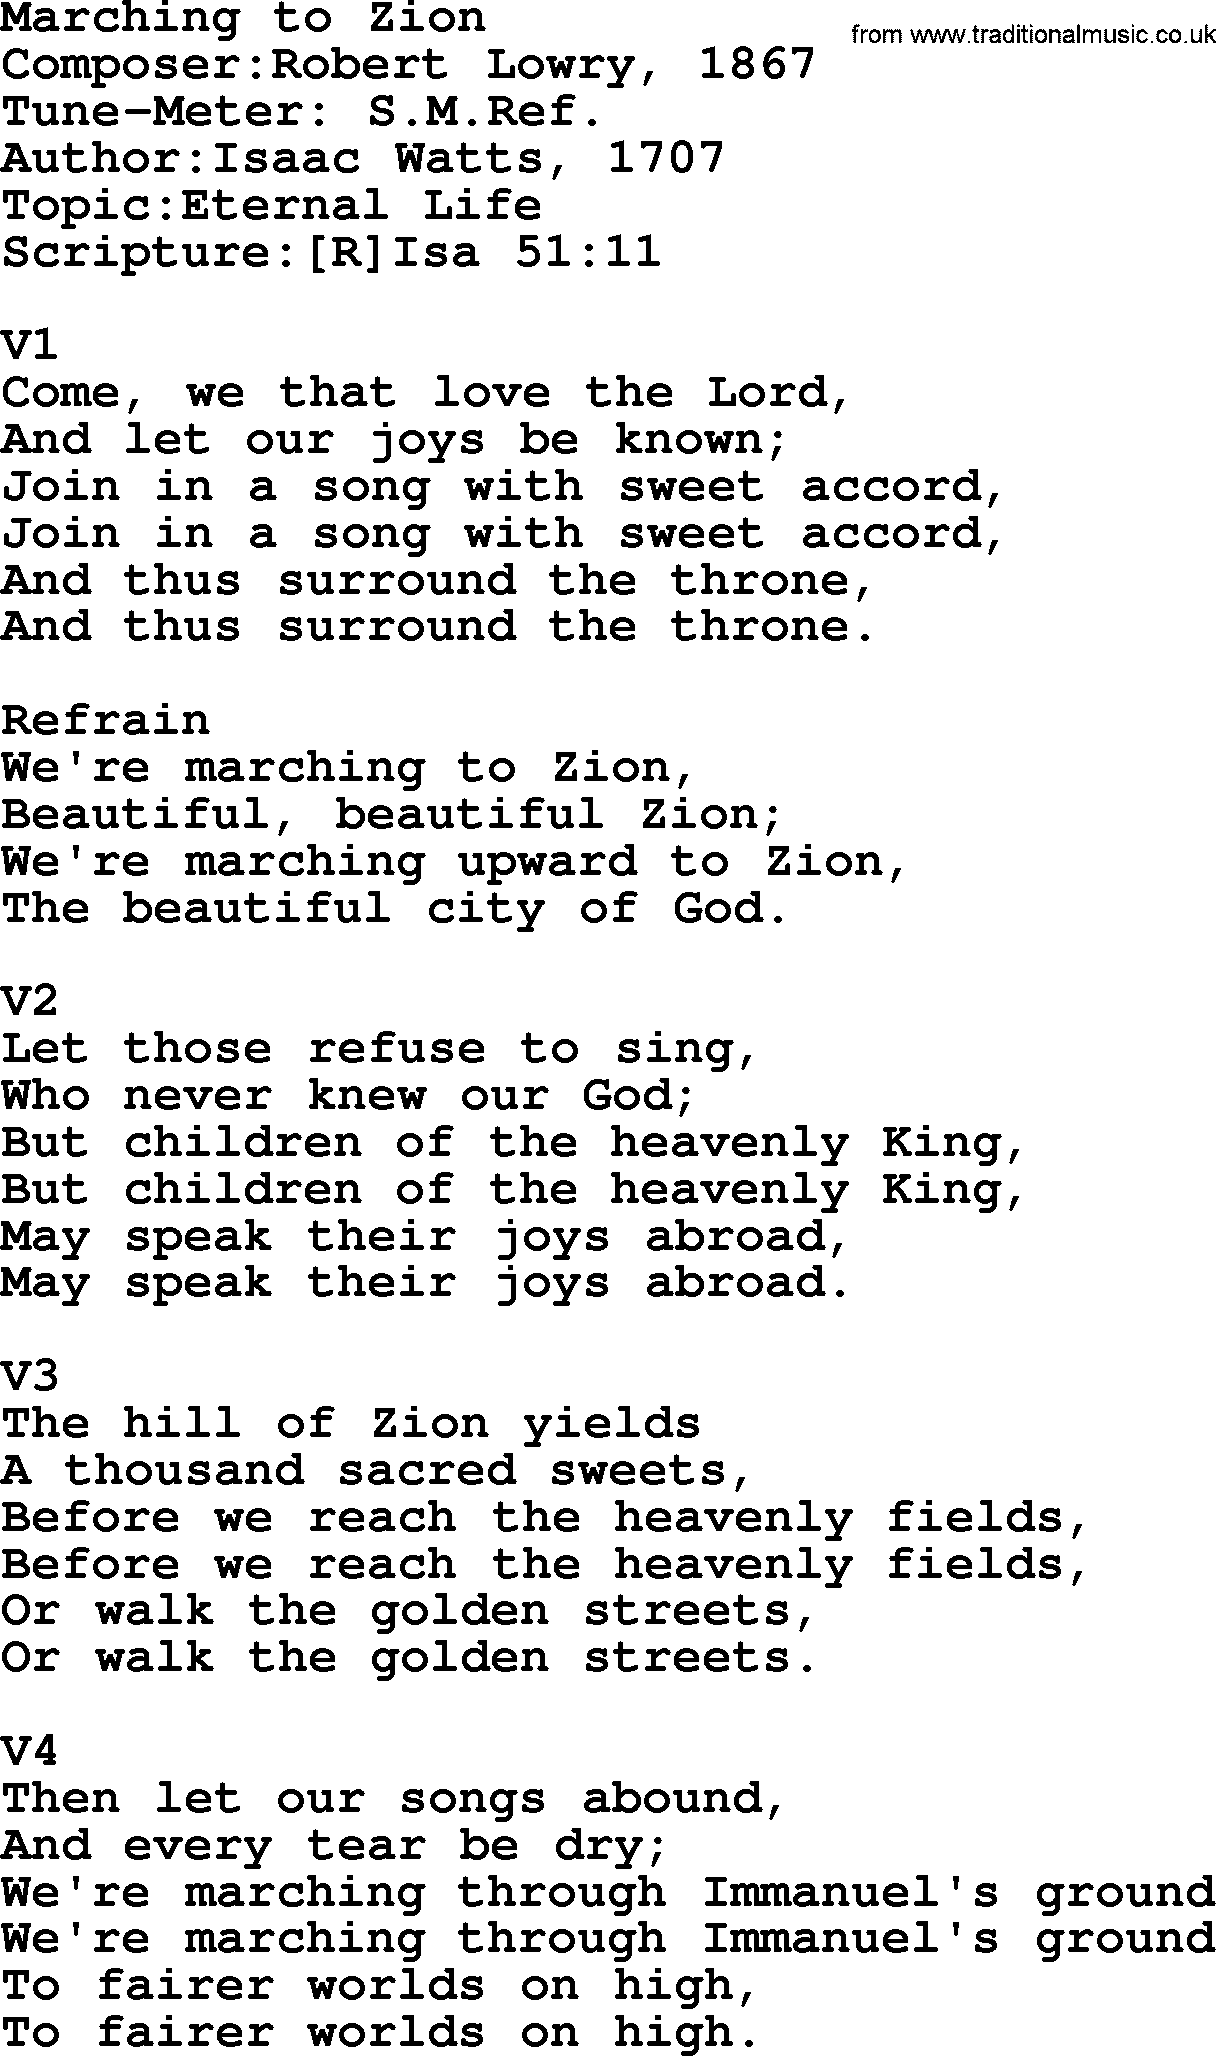 Adventist Hynms collection, Hymn: Marching To Zion, lyrics with PDF